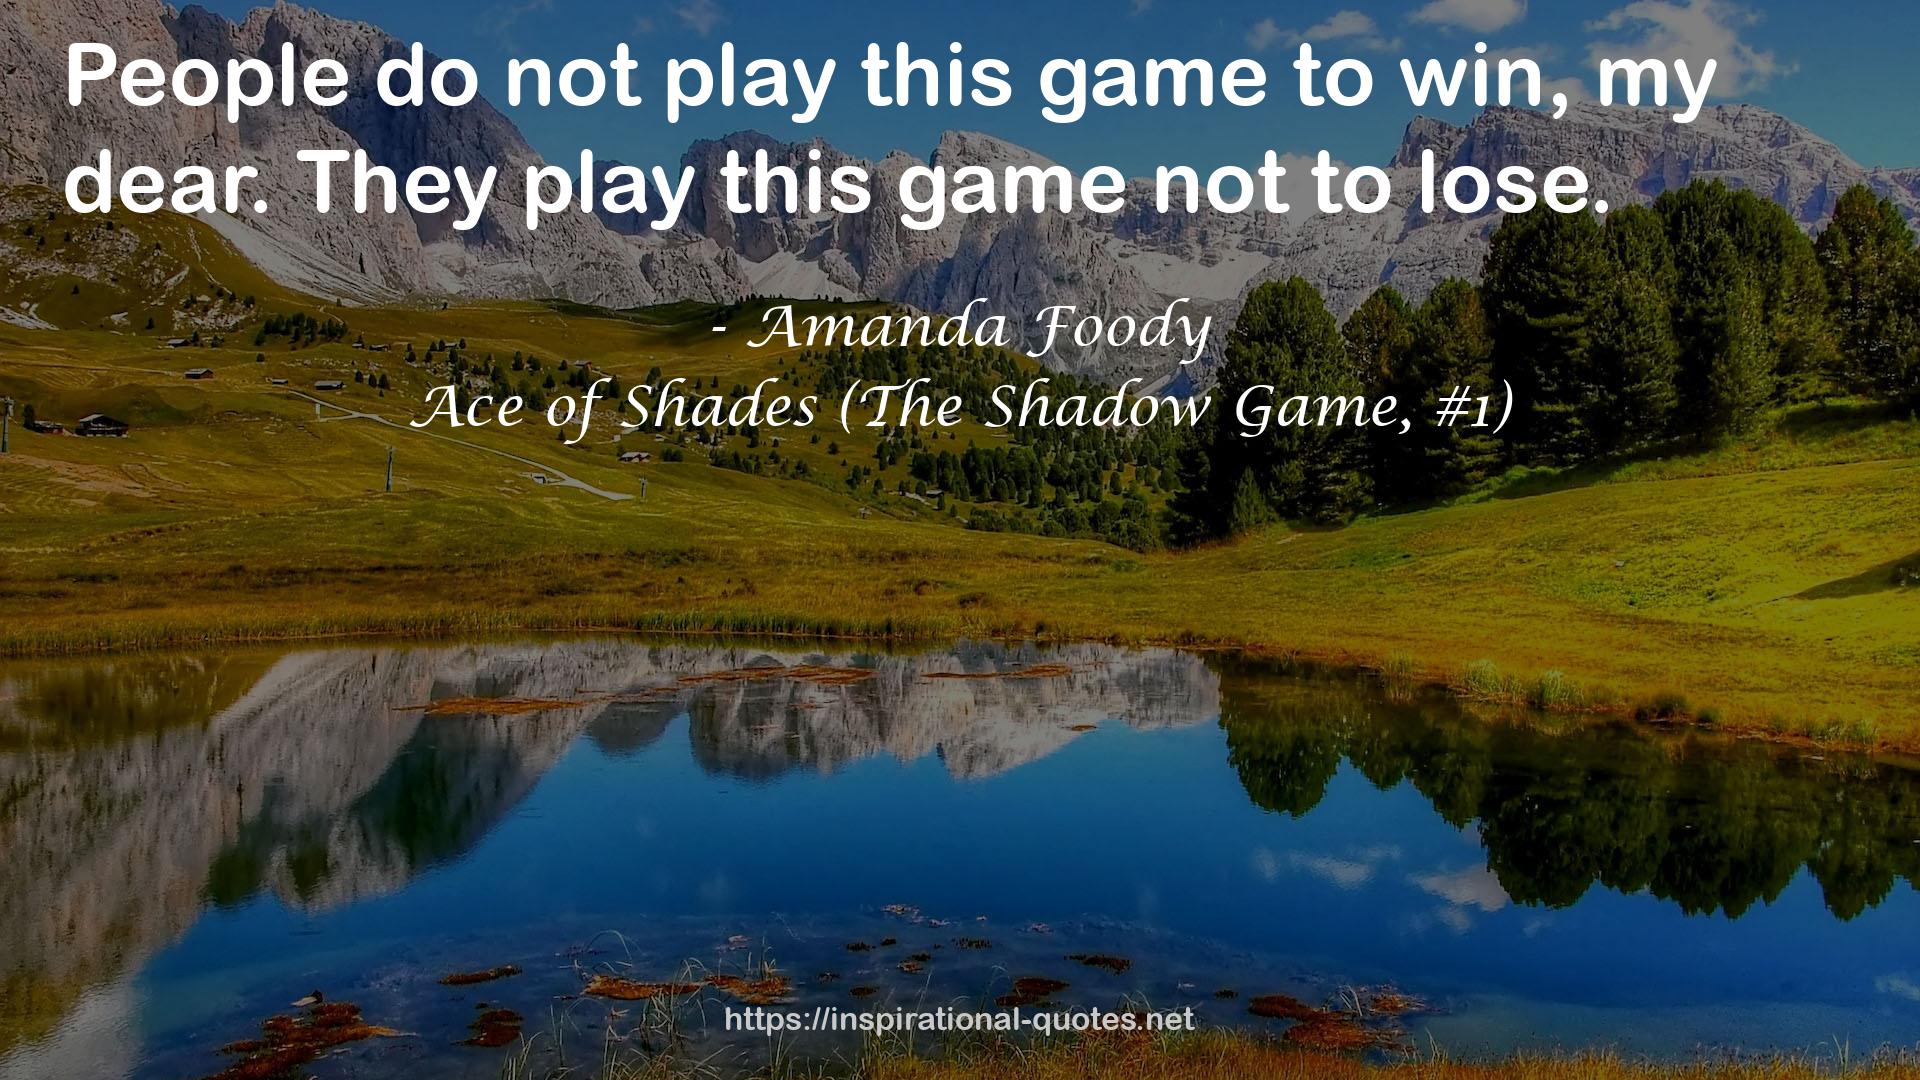 Ace of Shades (The Shadow Game, #1) QUOTES